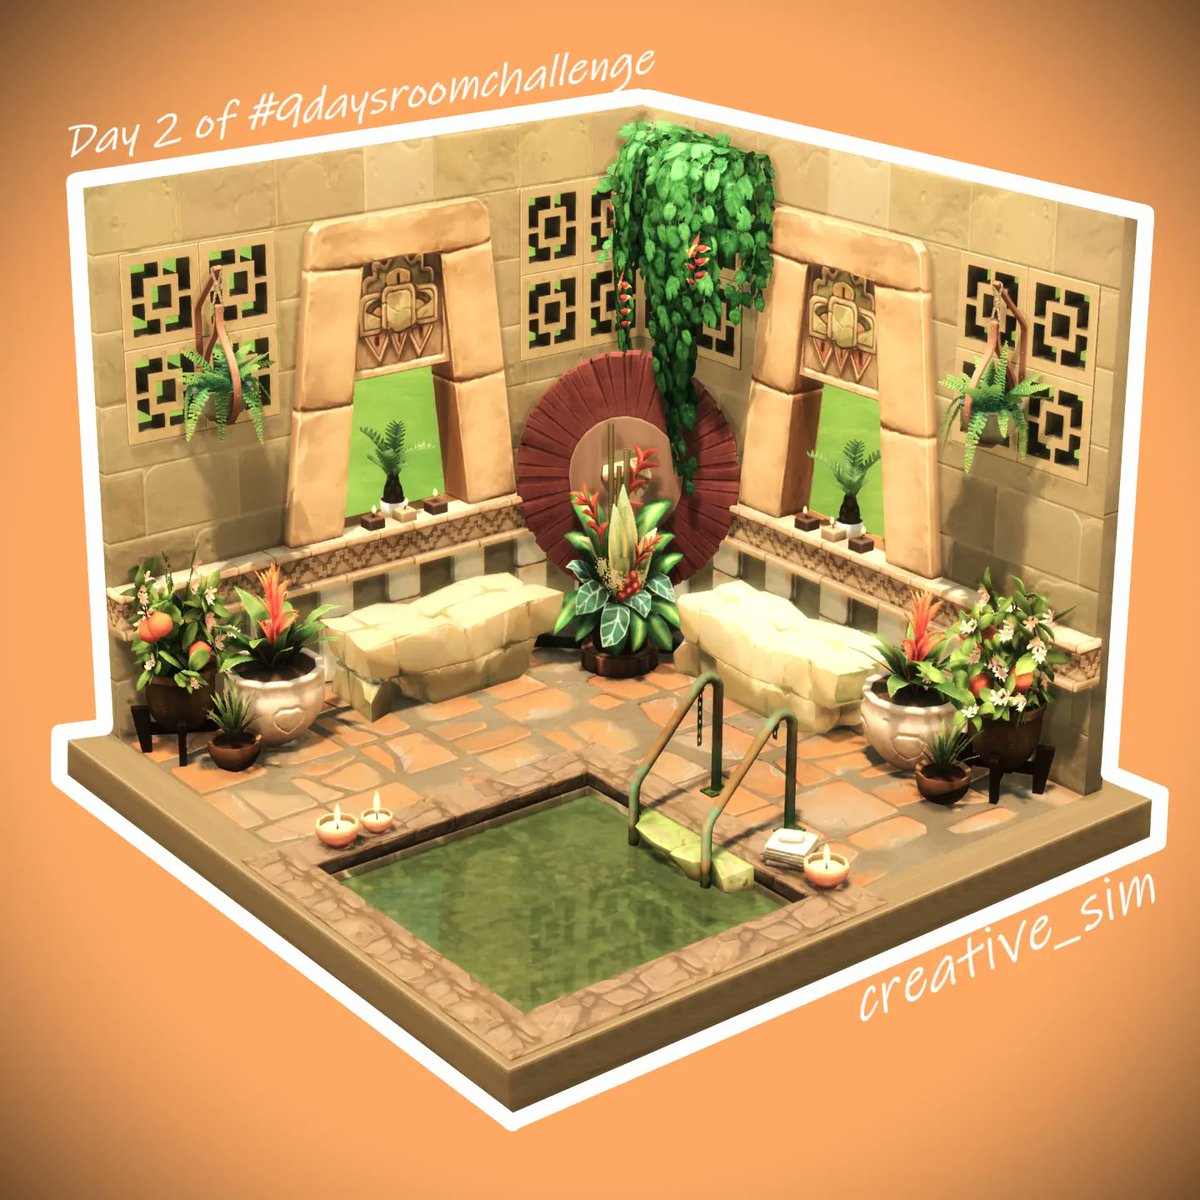 Sul sul🌼... this is the 2nd Day of the awesome #9daysroomchallenge by the great @axiisims. 💝 I'd build a relaxing Place named Brick Pool! Hope u like it!🌼 🌺Download in my Gallery. EA ID #Juliee86